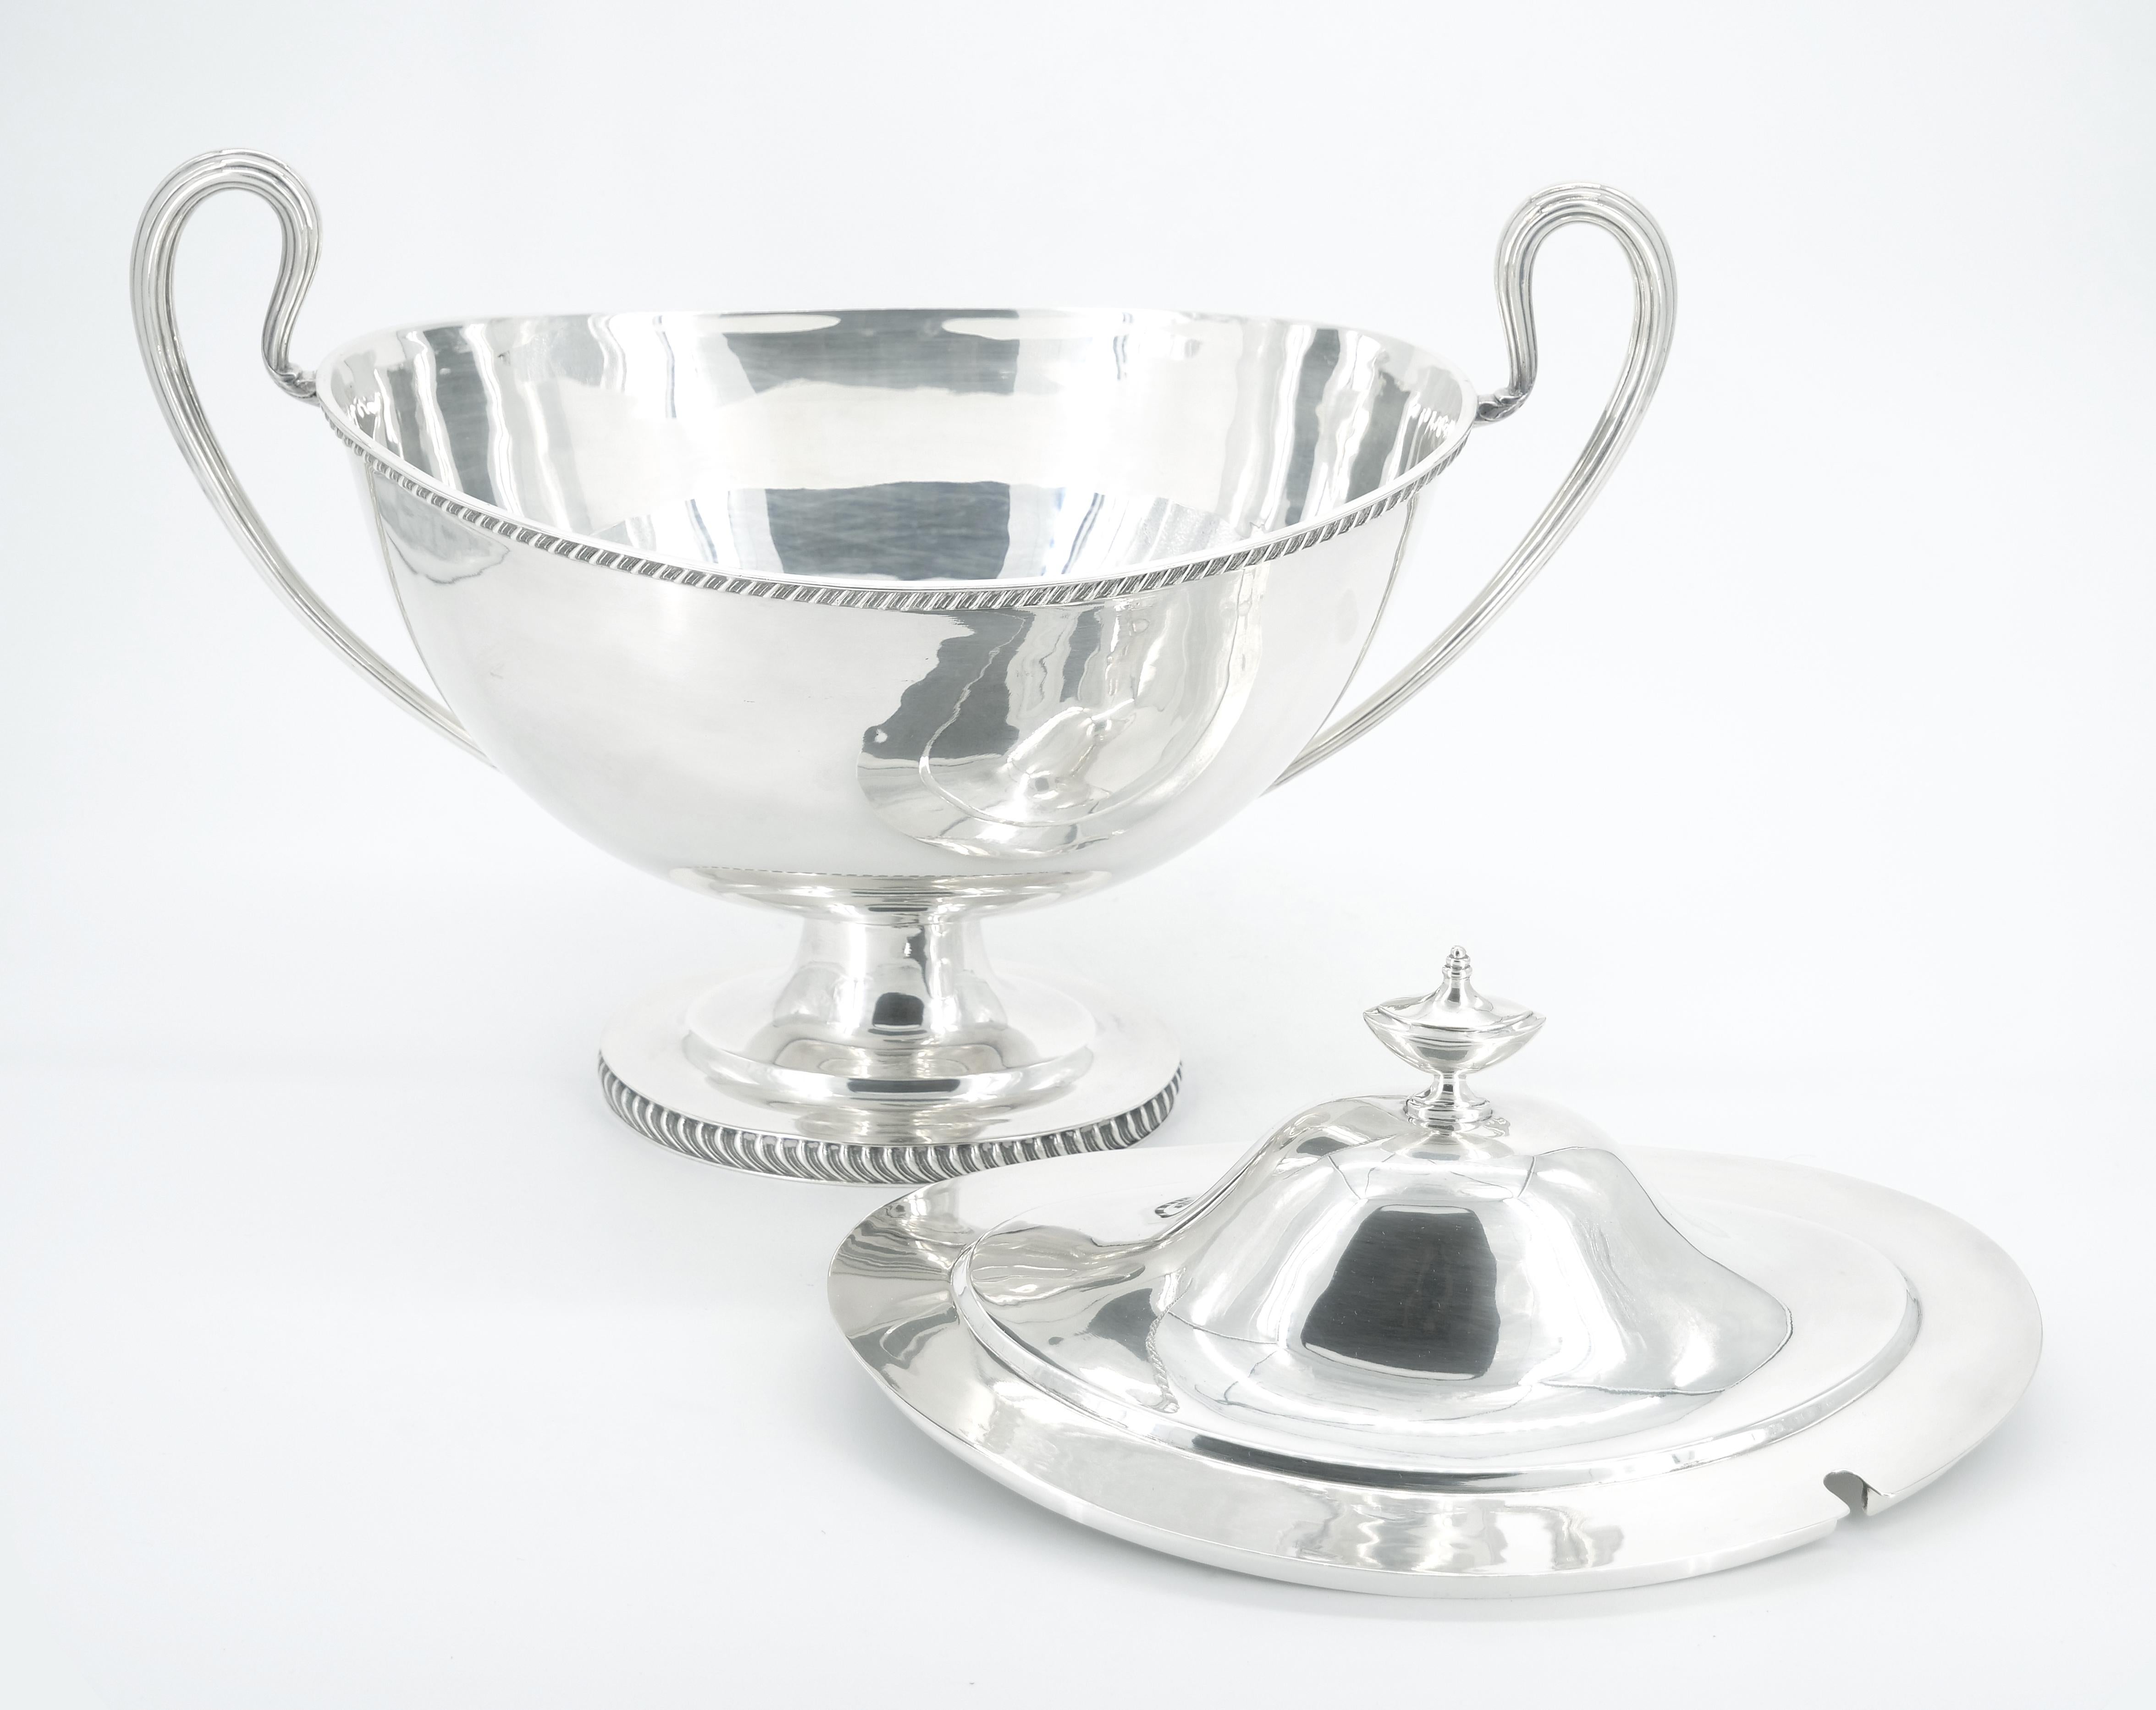 Immerse yourself in the refined elegance of our Large Early 20th Century English Silver Plate Tableware Covered Tureen. This striking piece boasts a sleek and clean Art Deco design, featuring a distinctive boat shape with two gracefully arched,